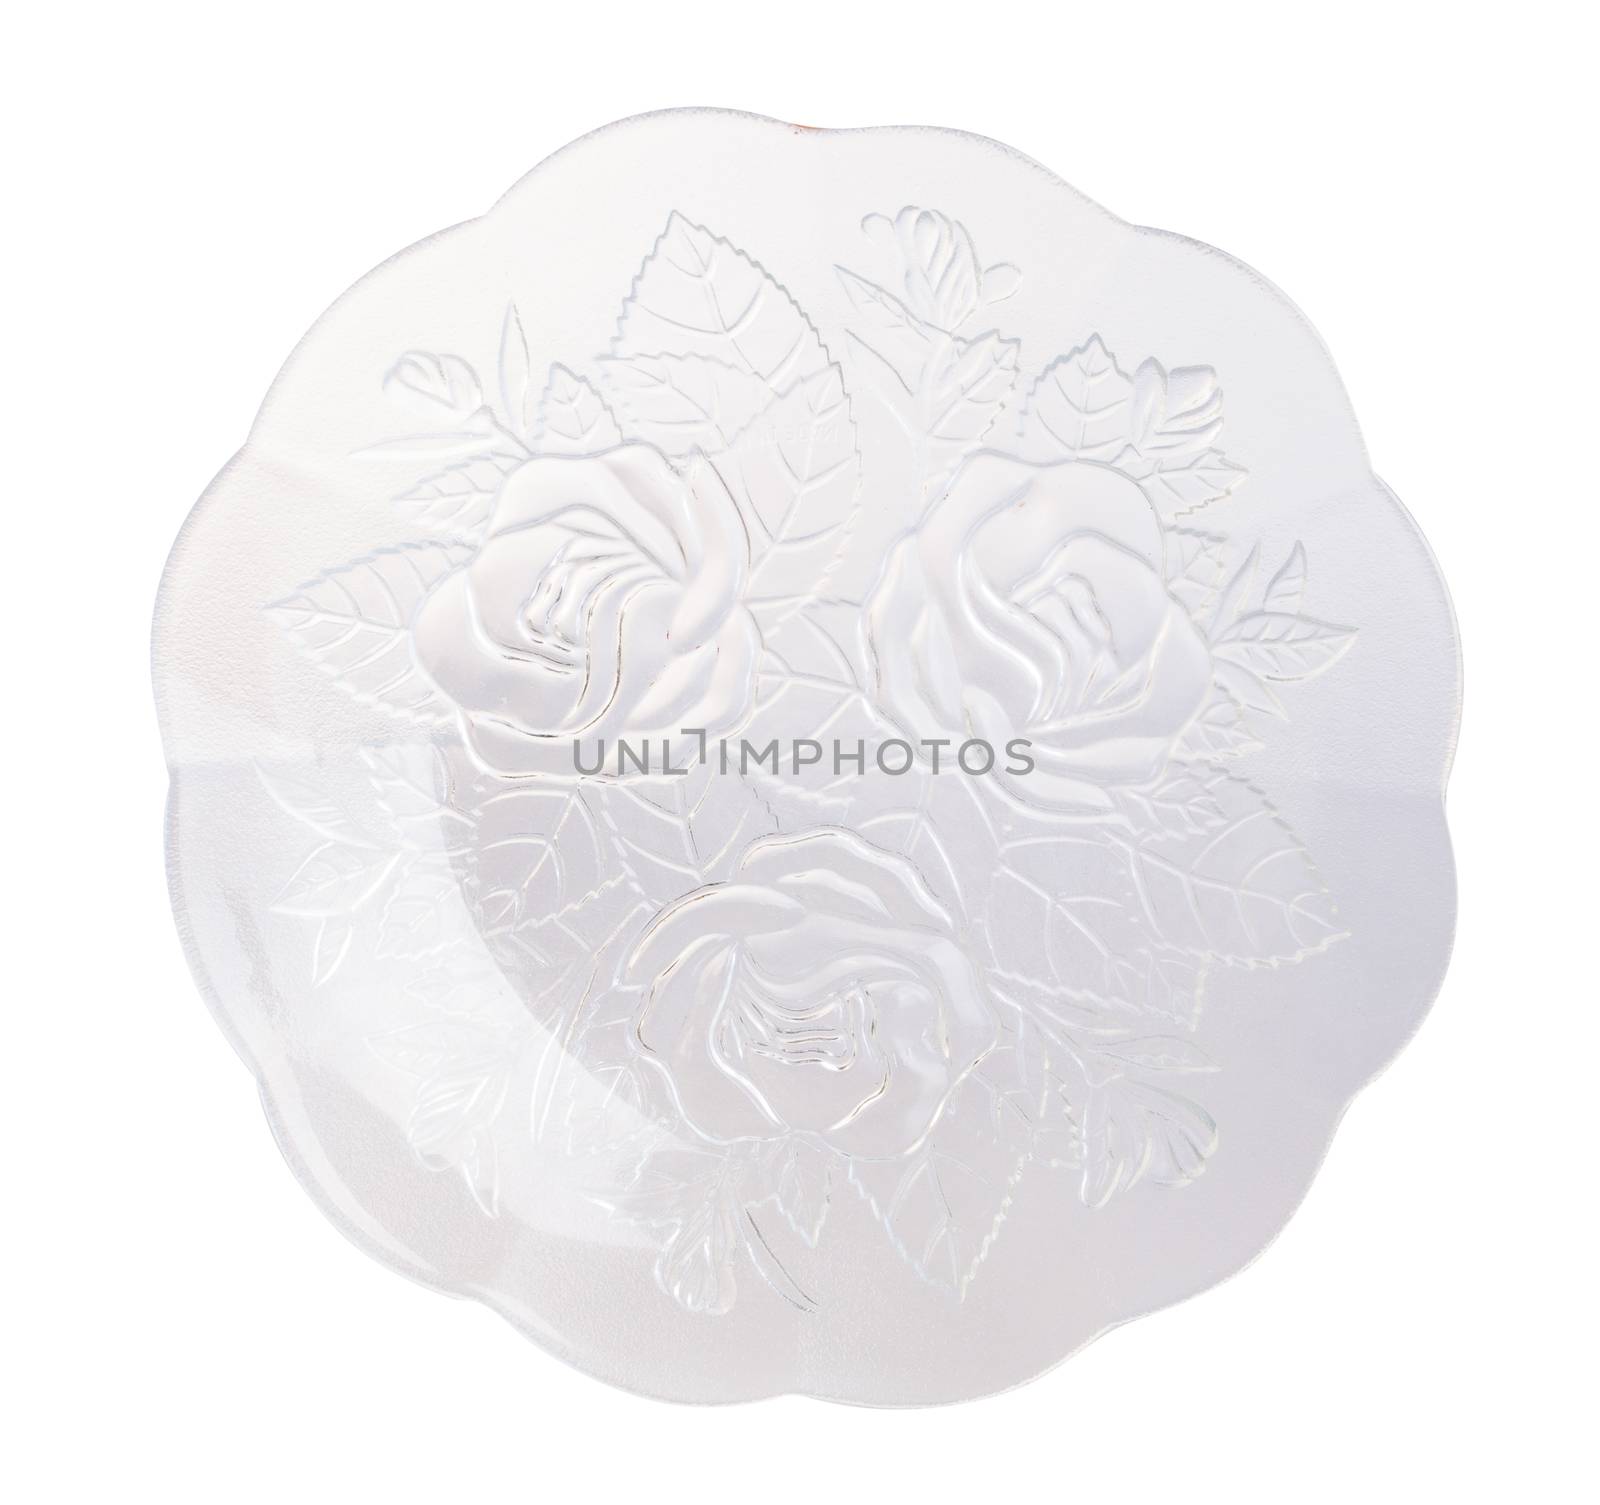 glass plate. glass plate on background. glass plate on the backg by heinteh